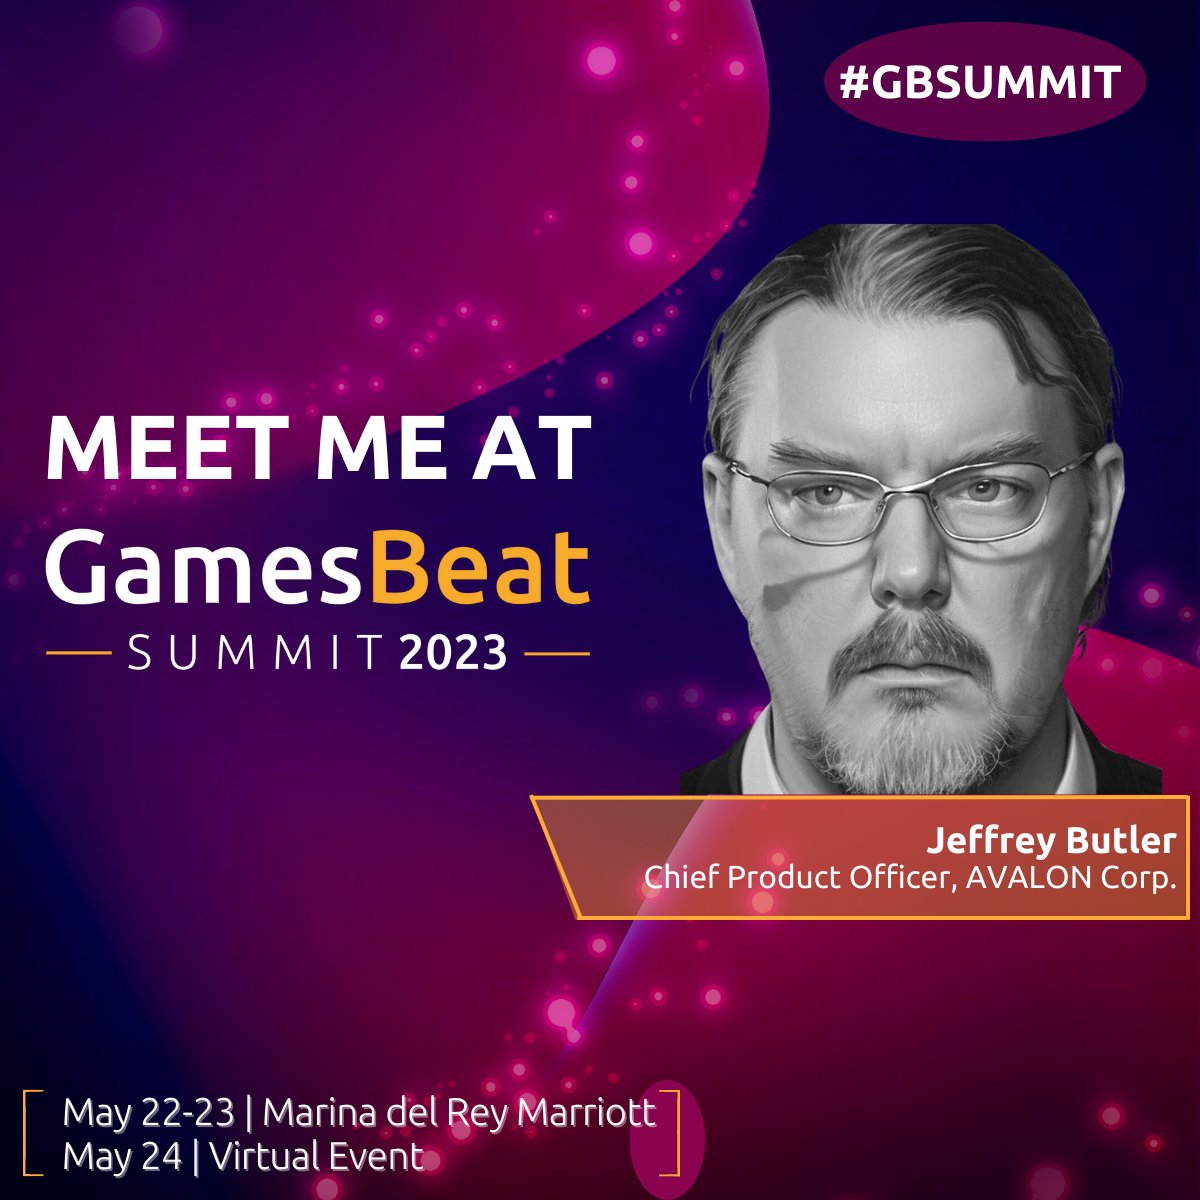 Catch up with @JButlerDev and all things AVALON at GamesBeat Summit on Monday! @GamesBeat #GBSummit